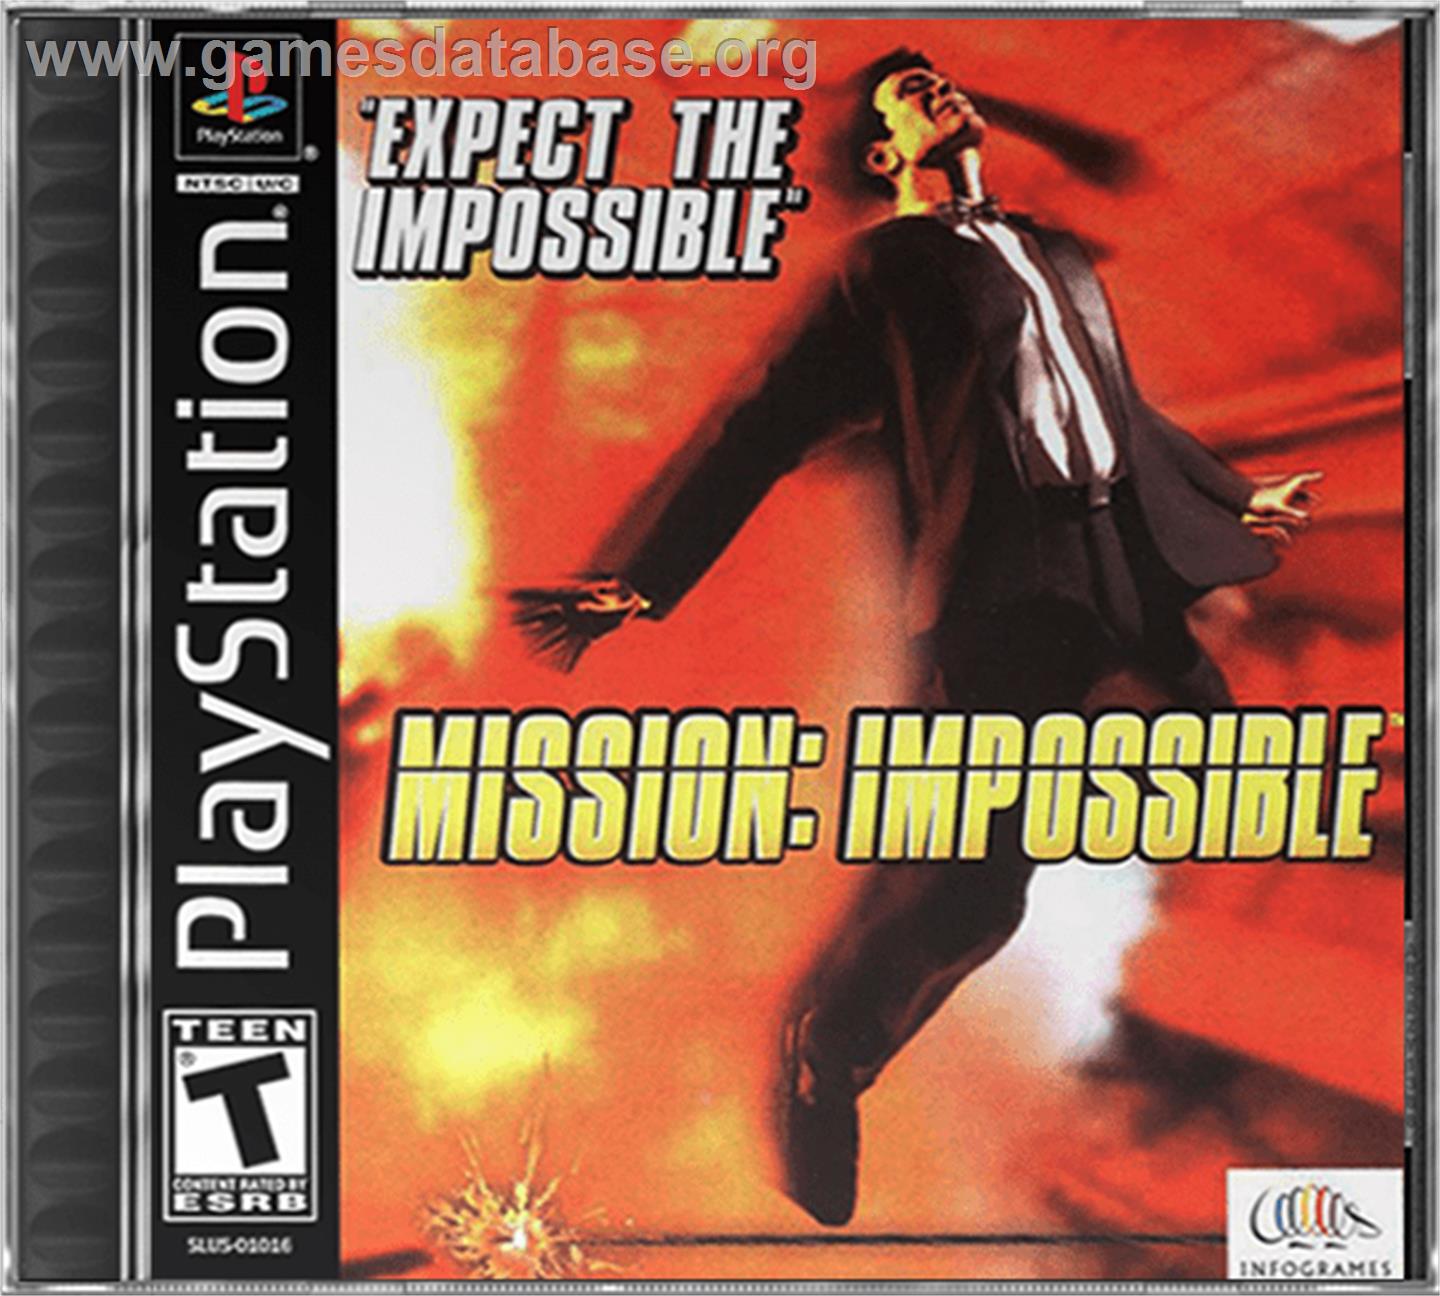 Mission: Impossible - Sony Playstation - Artwork - Box